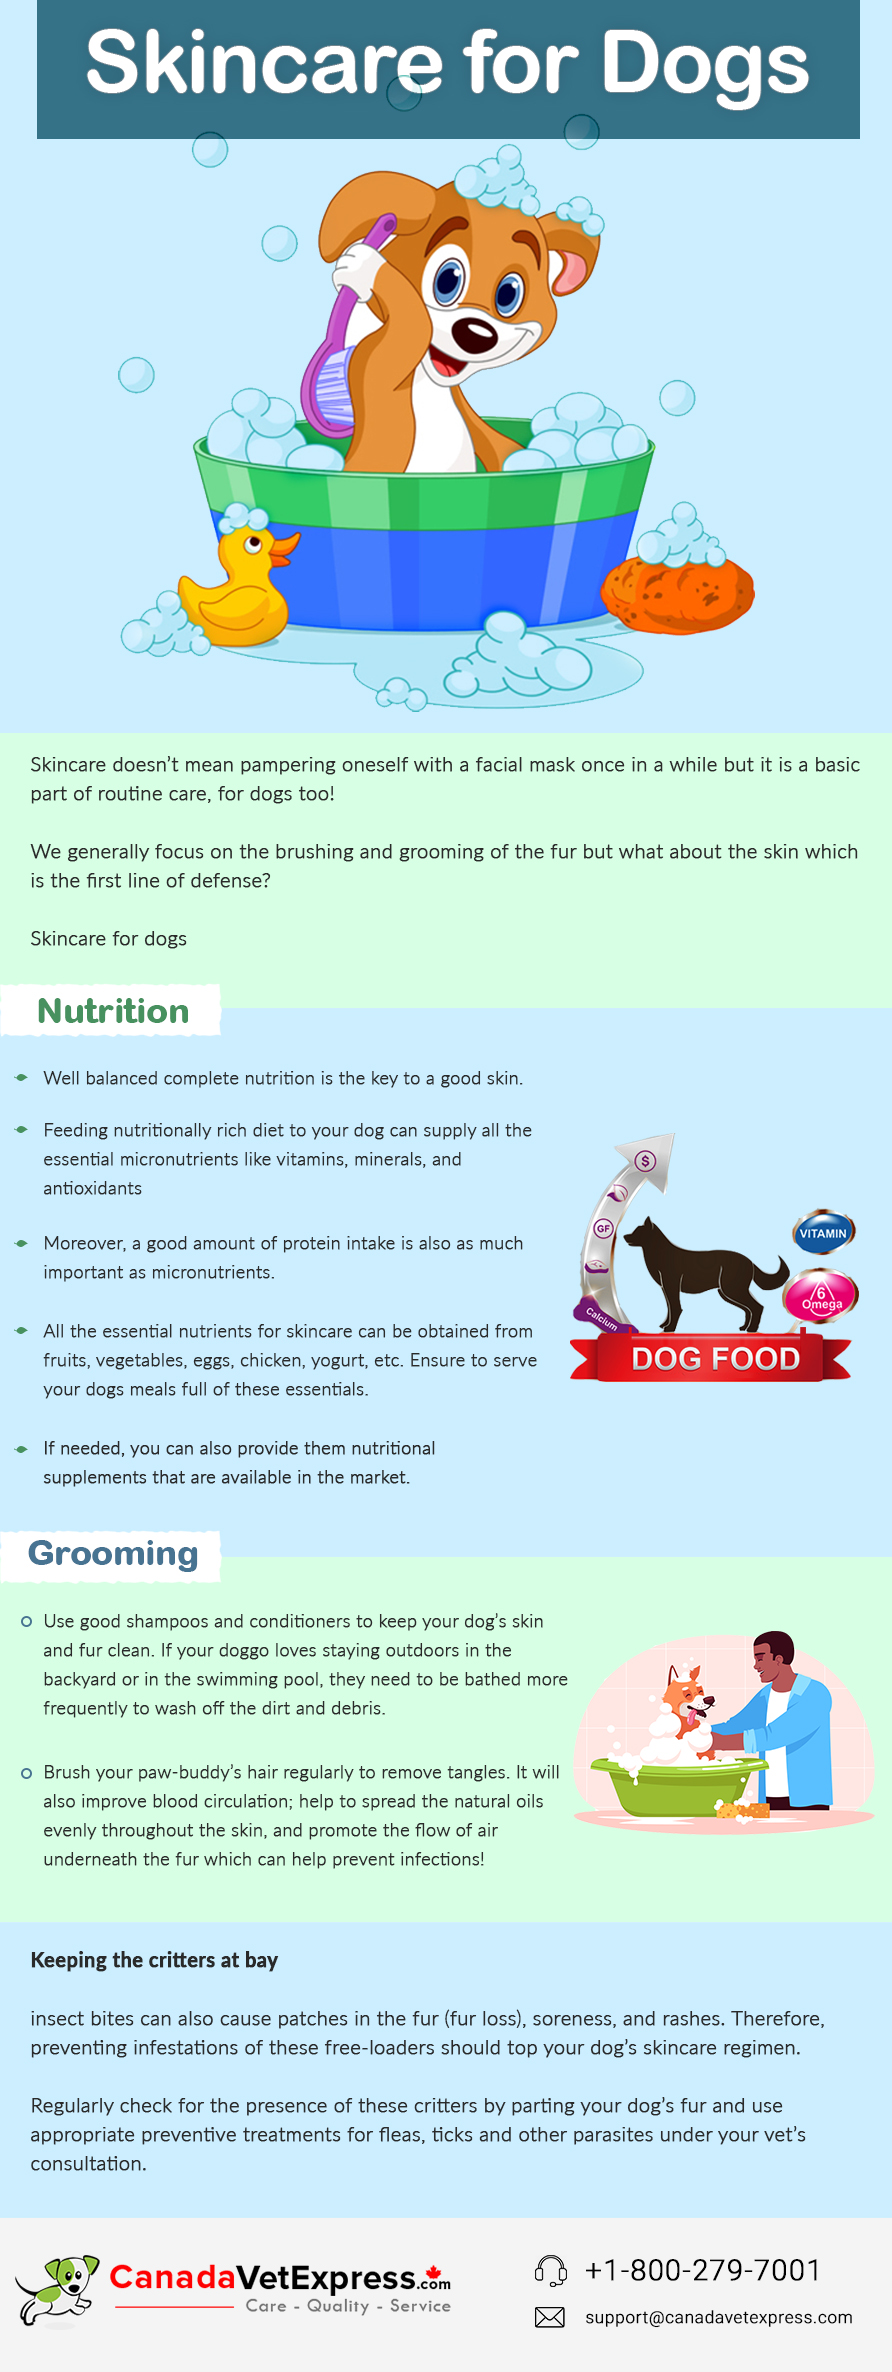 Skincare for dogs